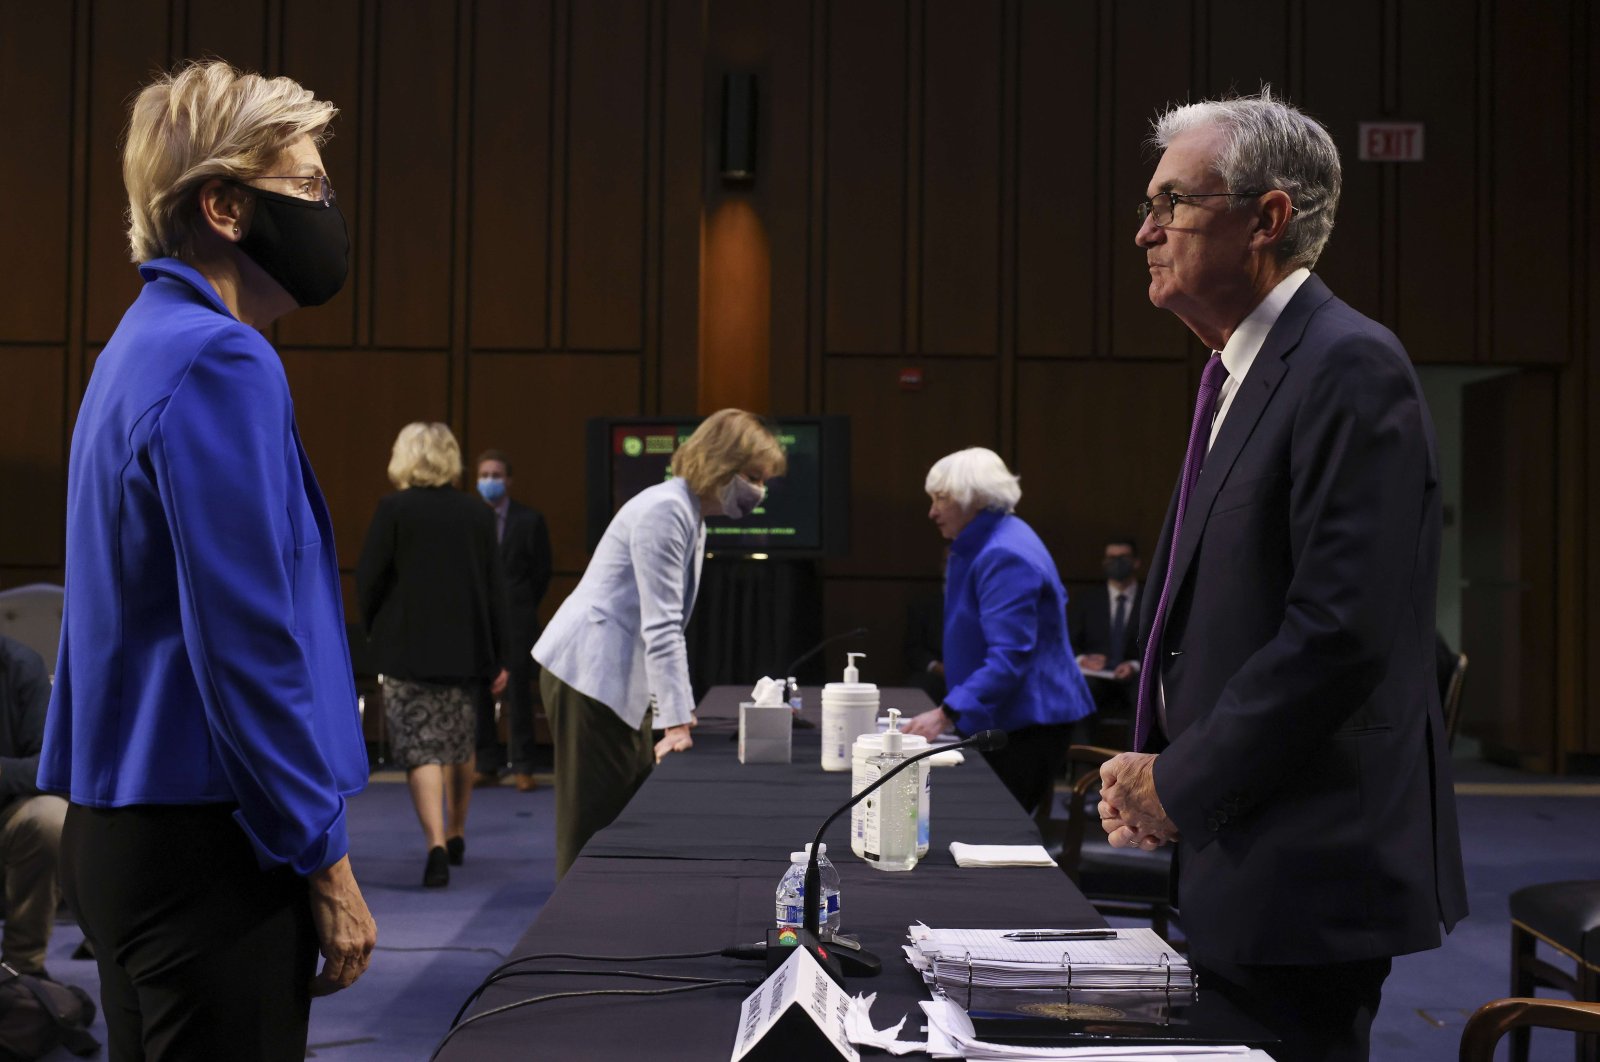 U.S. Sen. Elizabeth Warren (L) talks to Federal Reserve (Fed) Chairman Jerome Powell during a hearing by the Senate Banking Committee at the Hart Senate Office Building, Washington, D.C., U.S., Sept. 28, 2021. (AFP Photo)